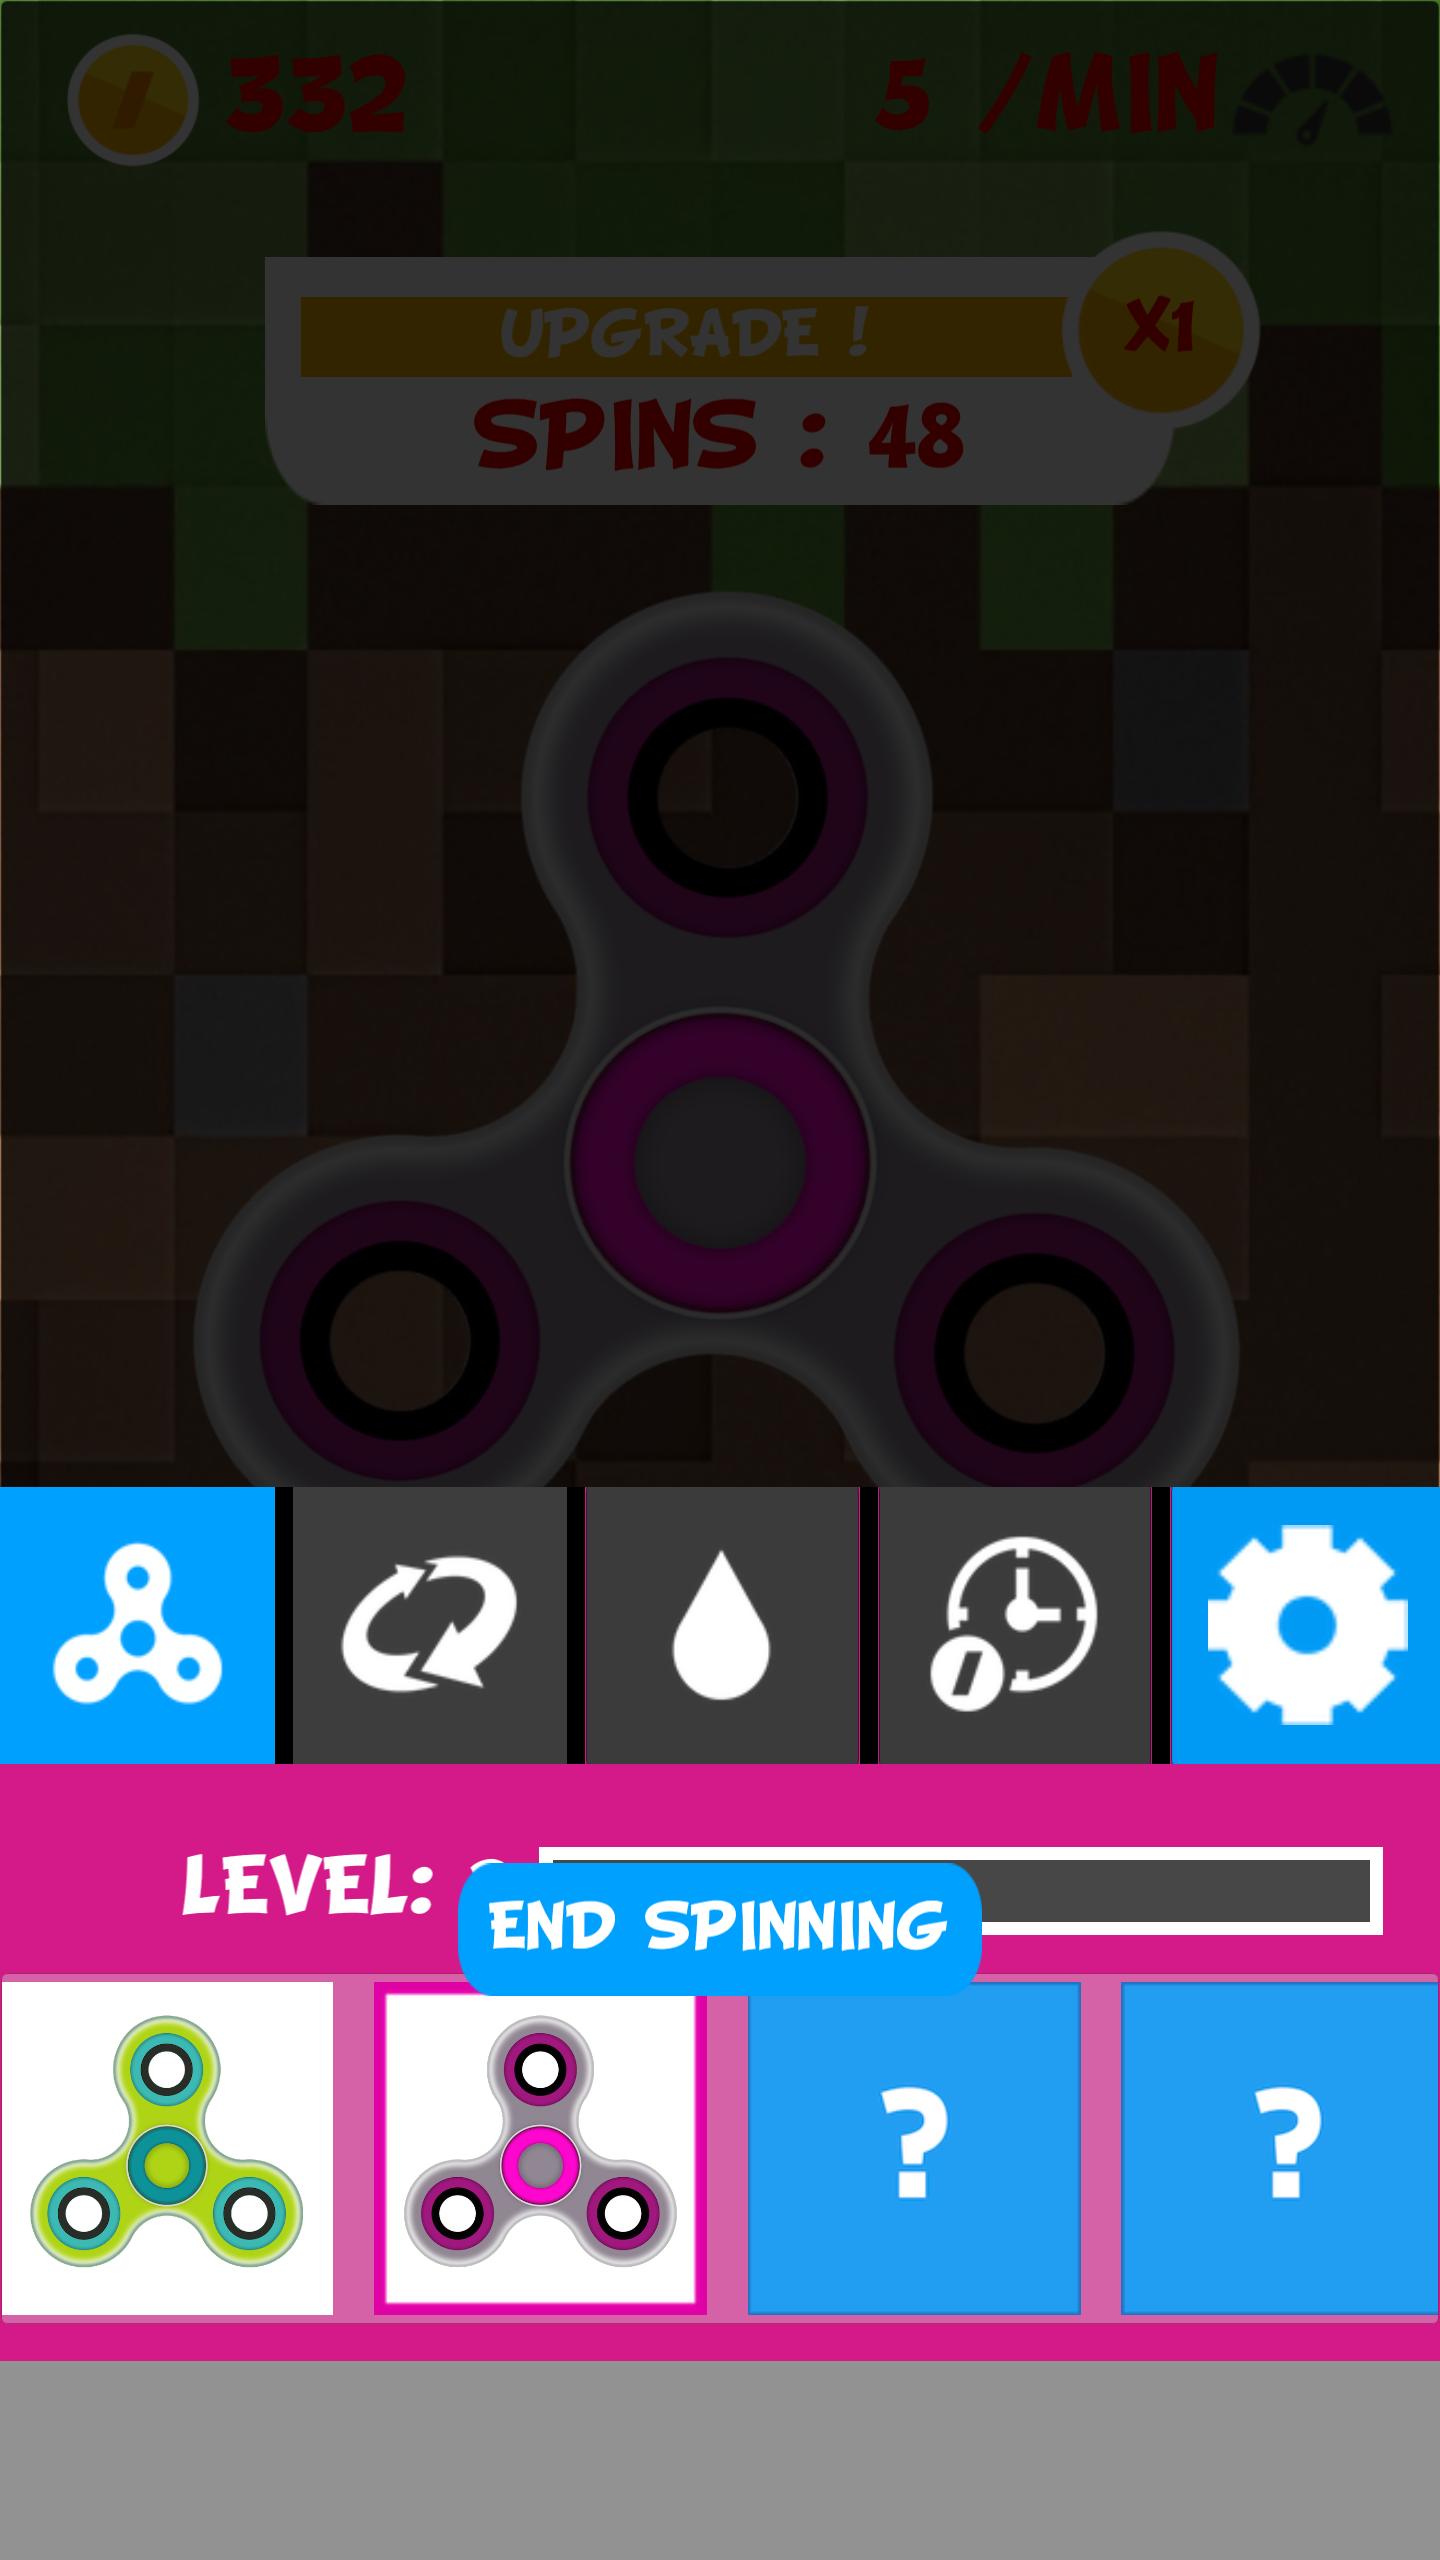 Spin now. Spin Android физика игра. Spin Android. Lust Spin на андроид. Finner game.